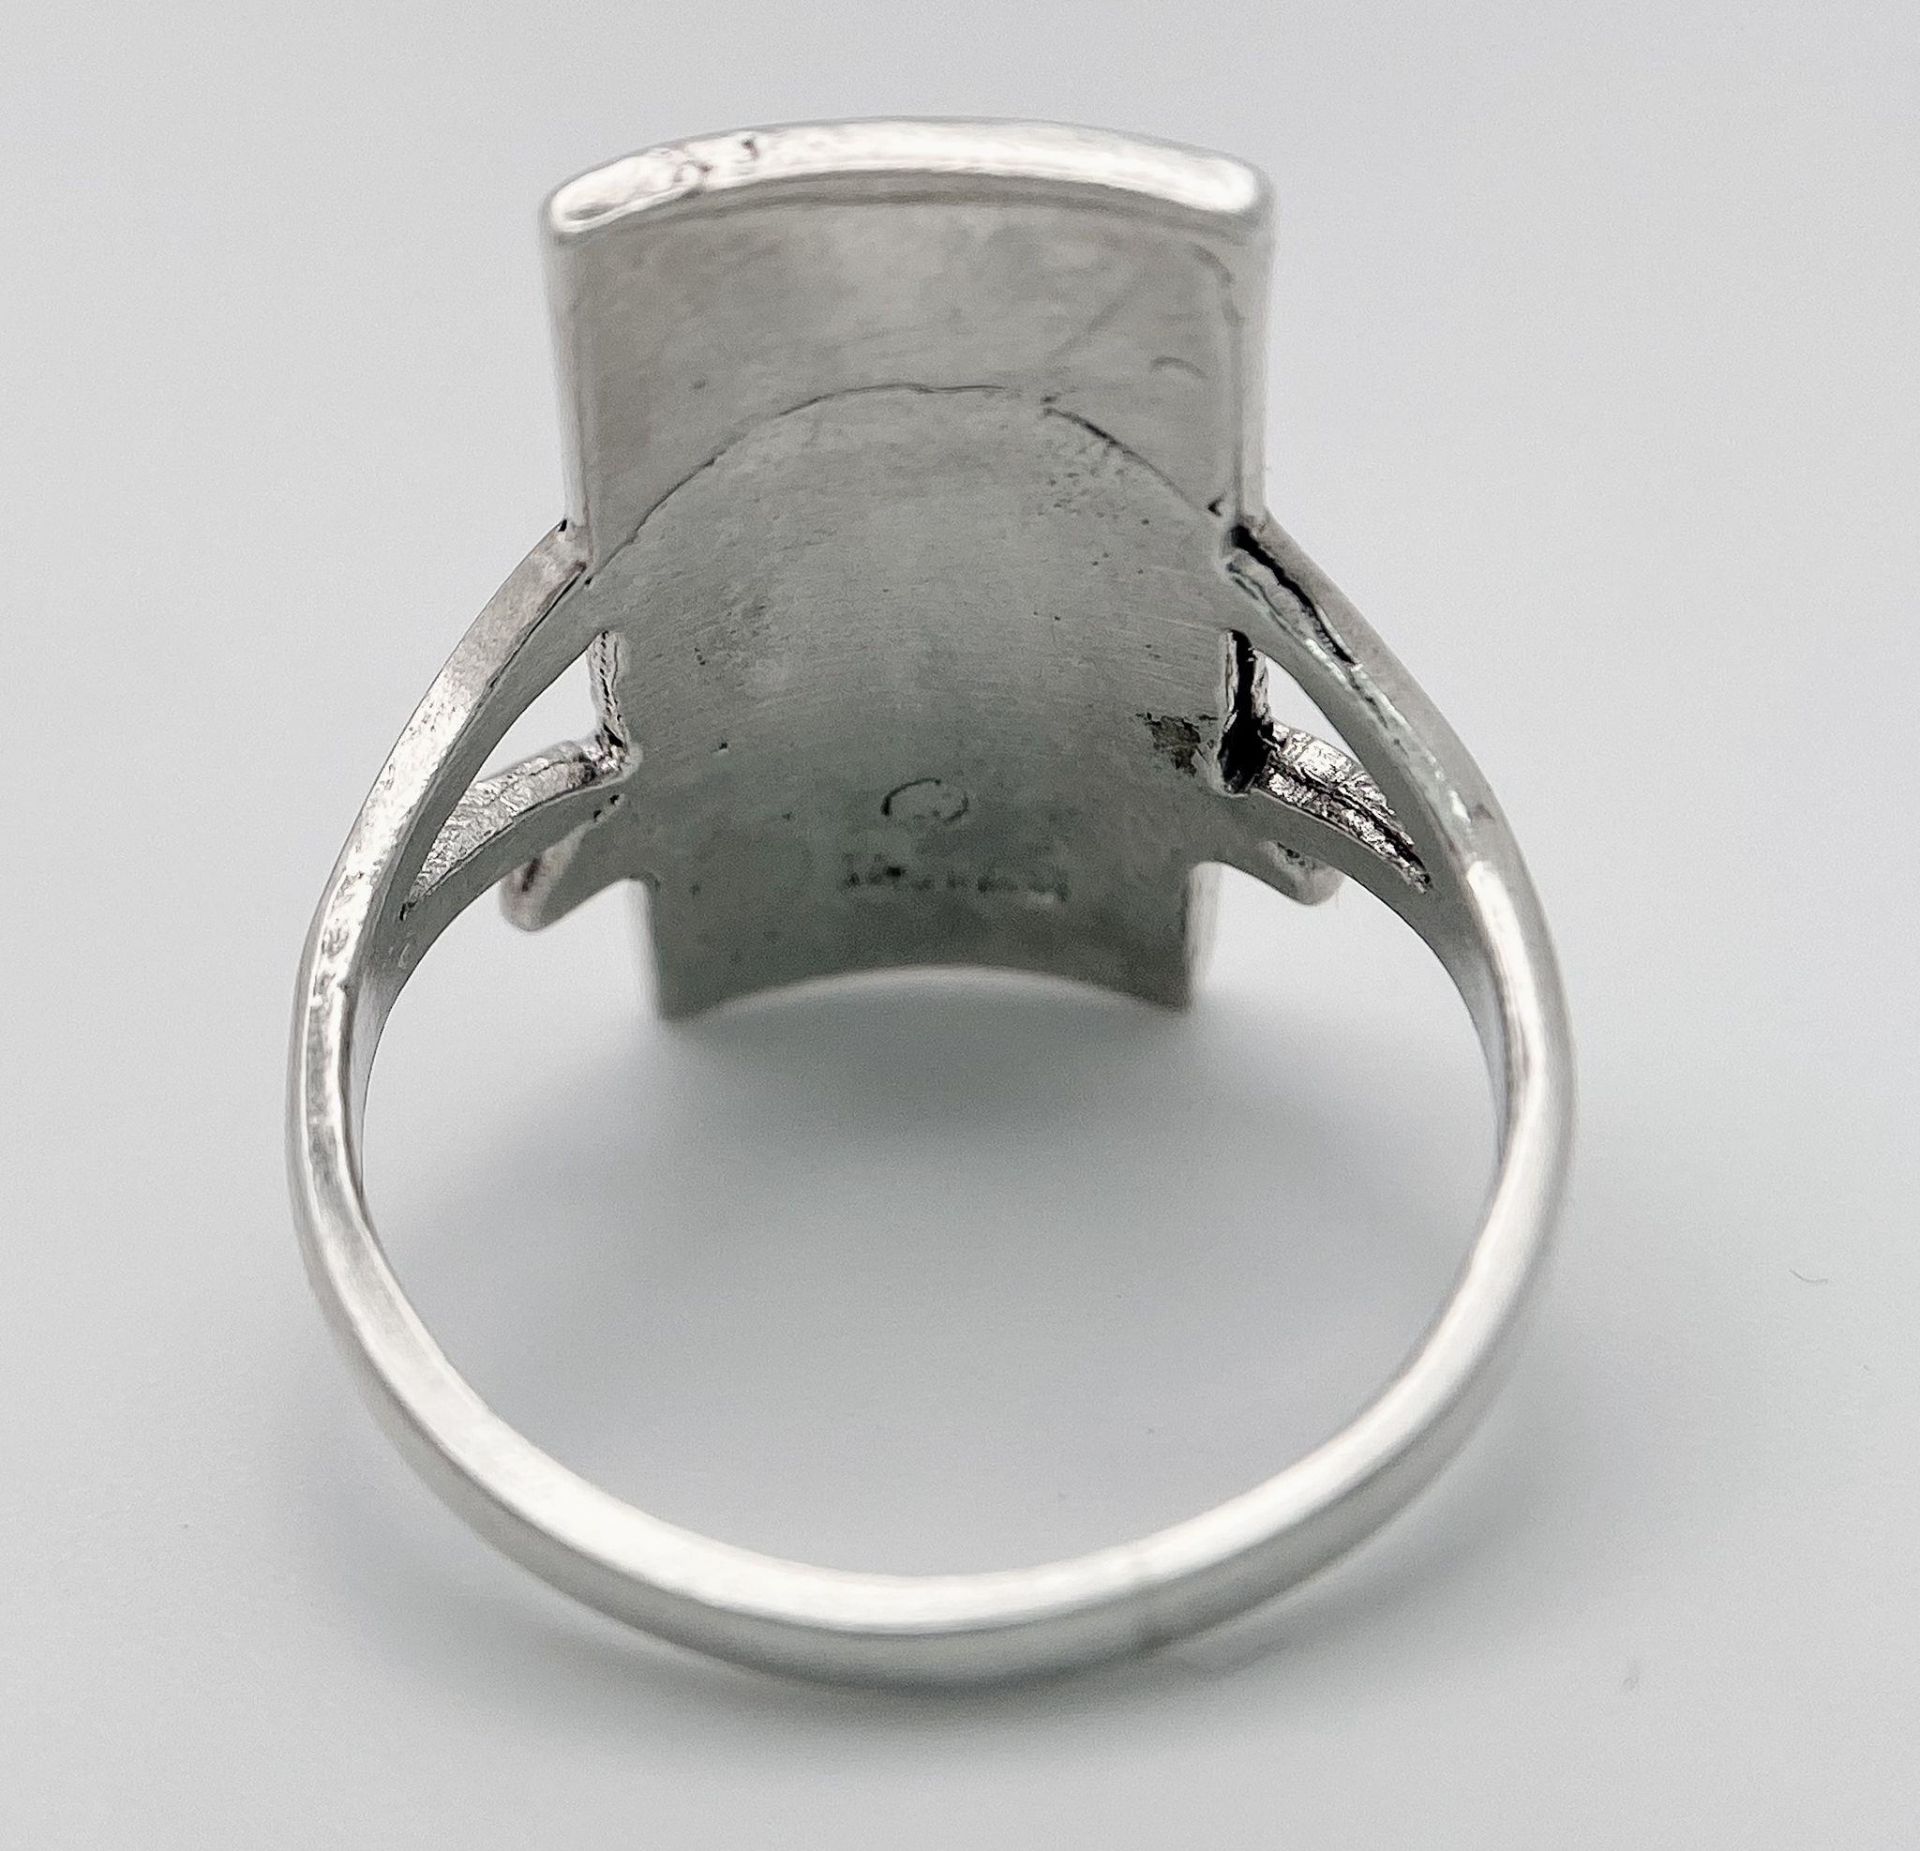 A Vintage Silver Totem Pole Detailed Native American/ Ethnic Totem Pole Ring Size N. The Crown - Image 6 of 9